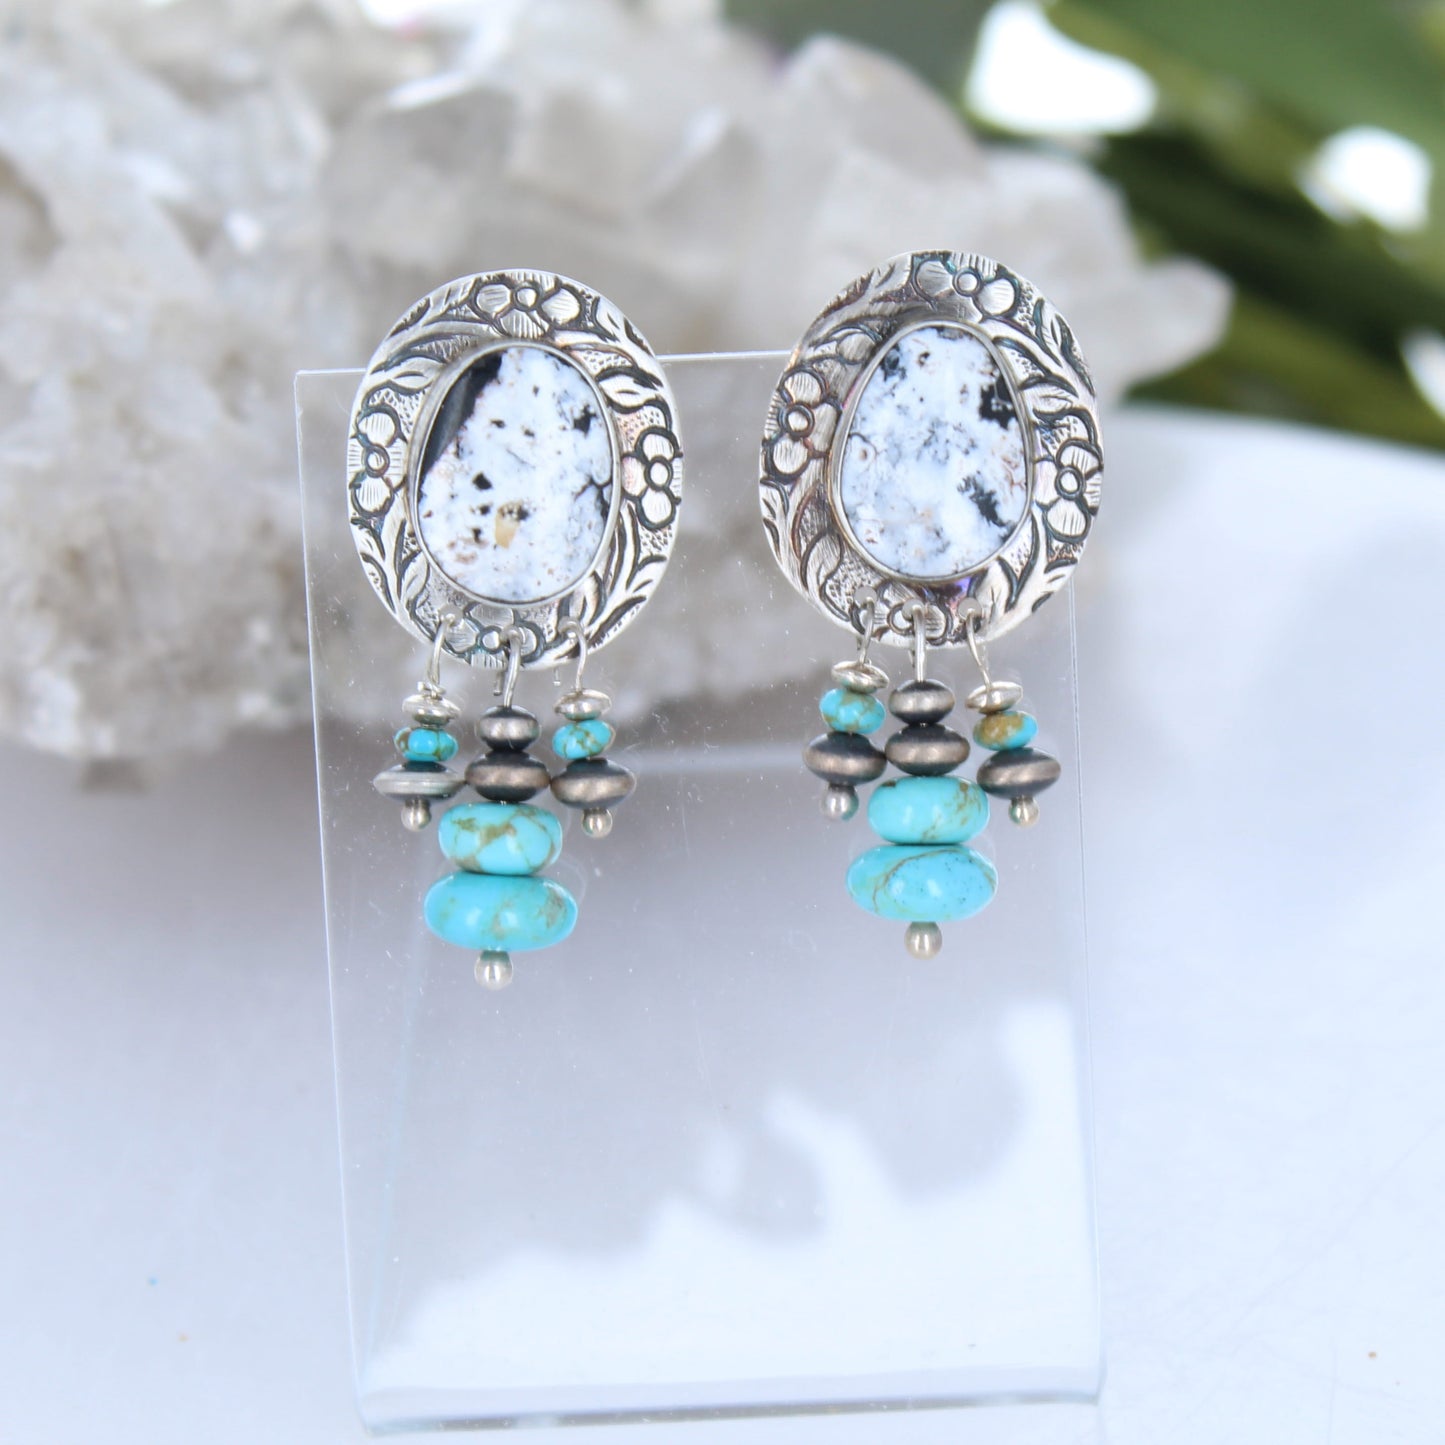 Dramatic White Buffalo and #8 mine Turquoise Earrings Patterned Sterling